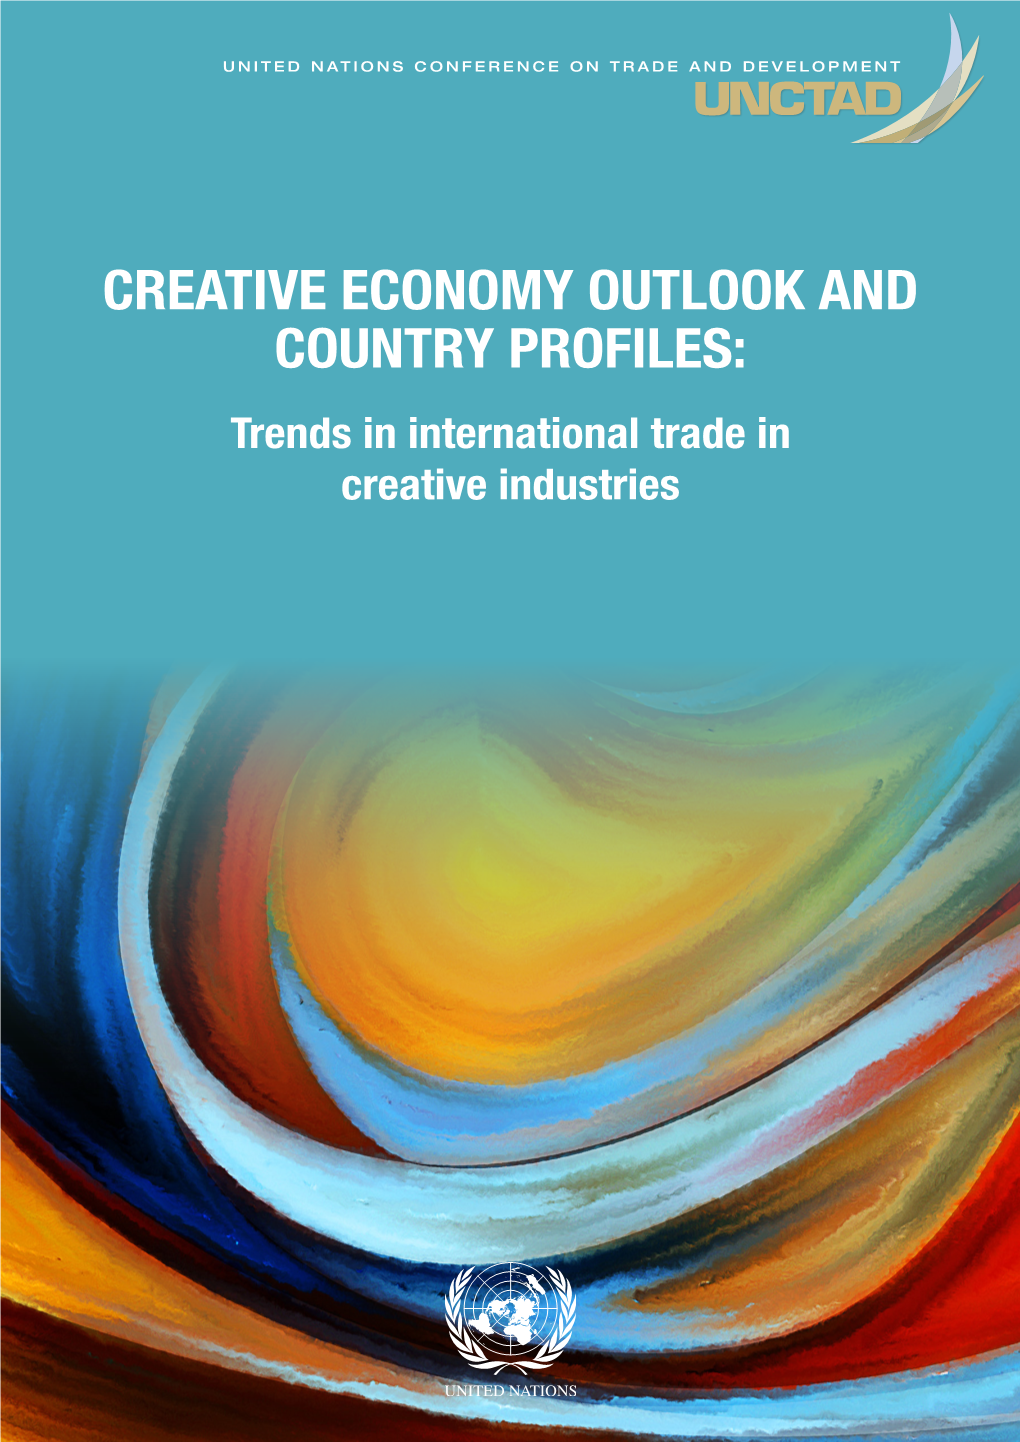 CREATIVE ECONOMY OUTLOOK and COUNTRY PROFILES: Trends in International Trade in Creative Industries